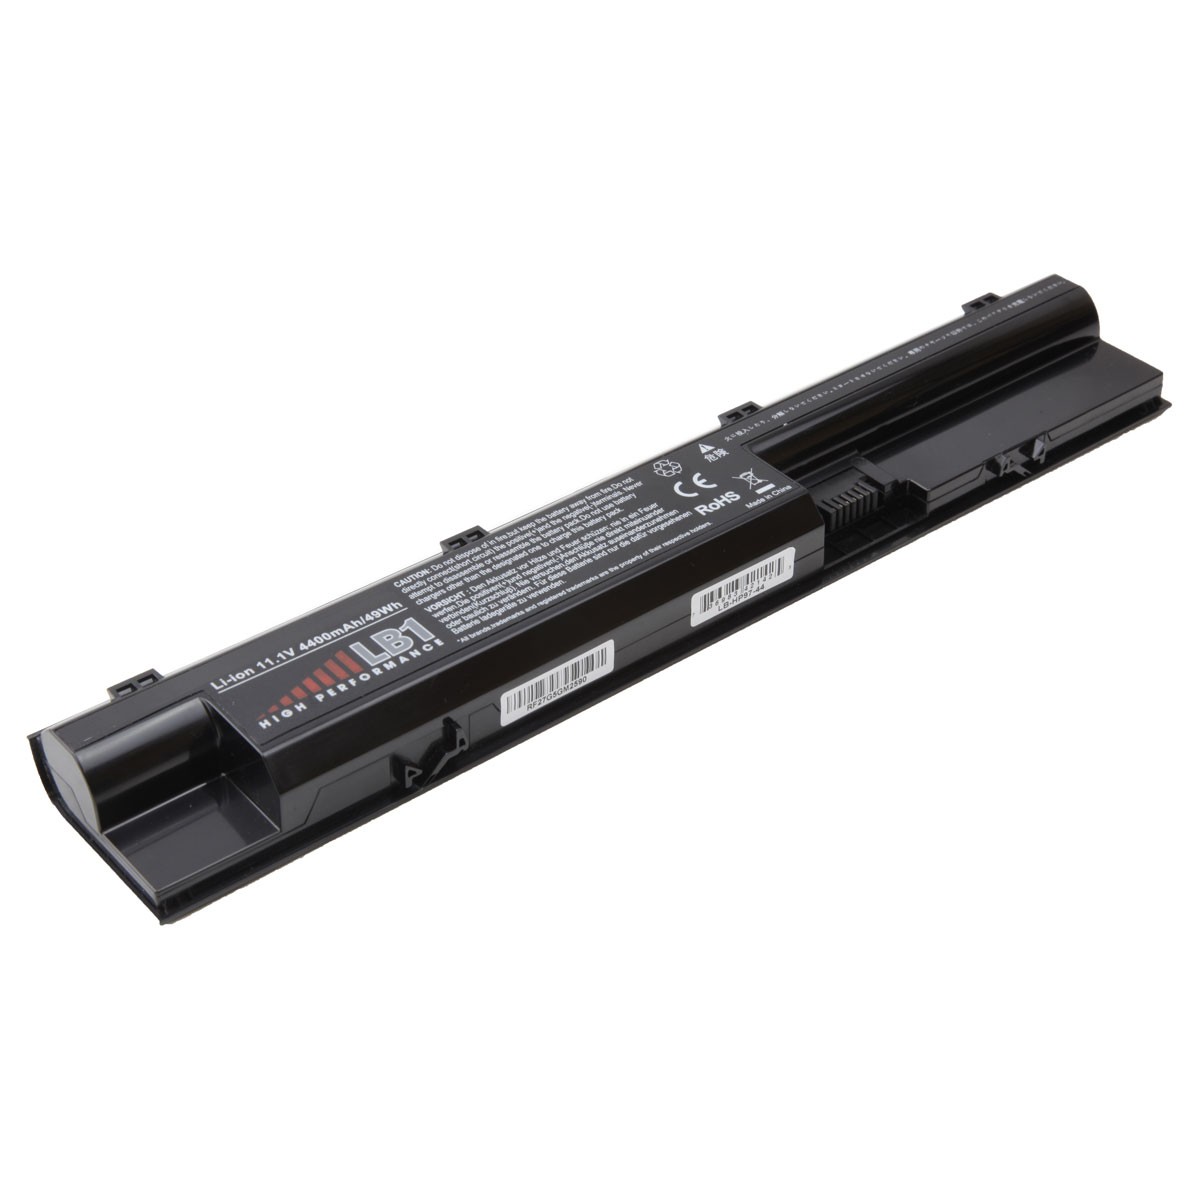  HP Laptop Battery Replacement